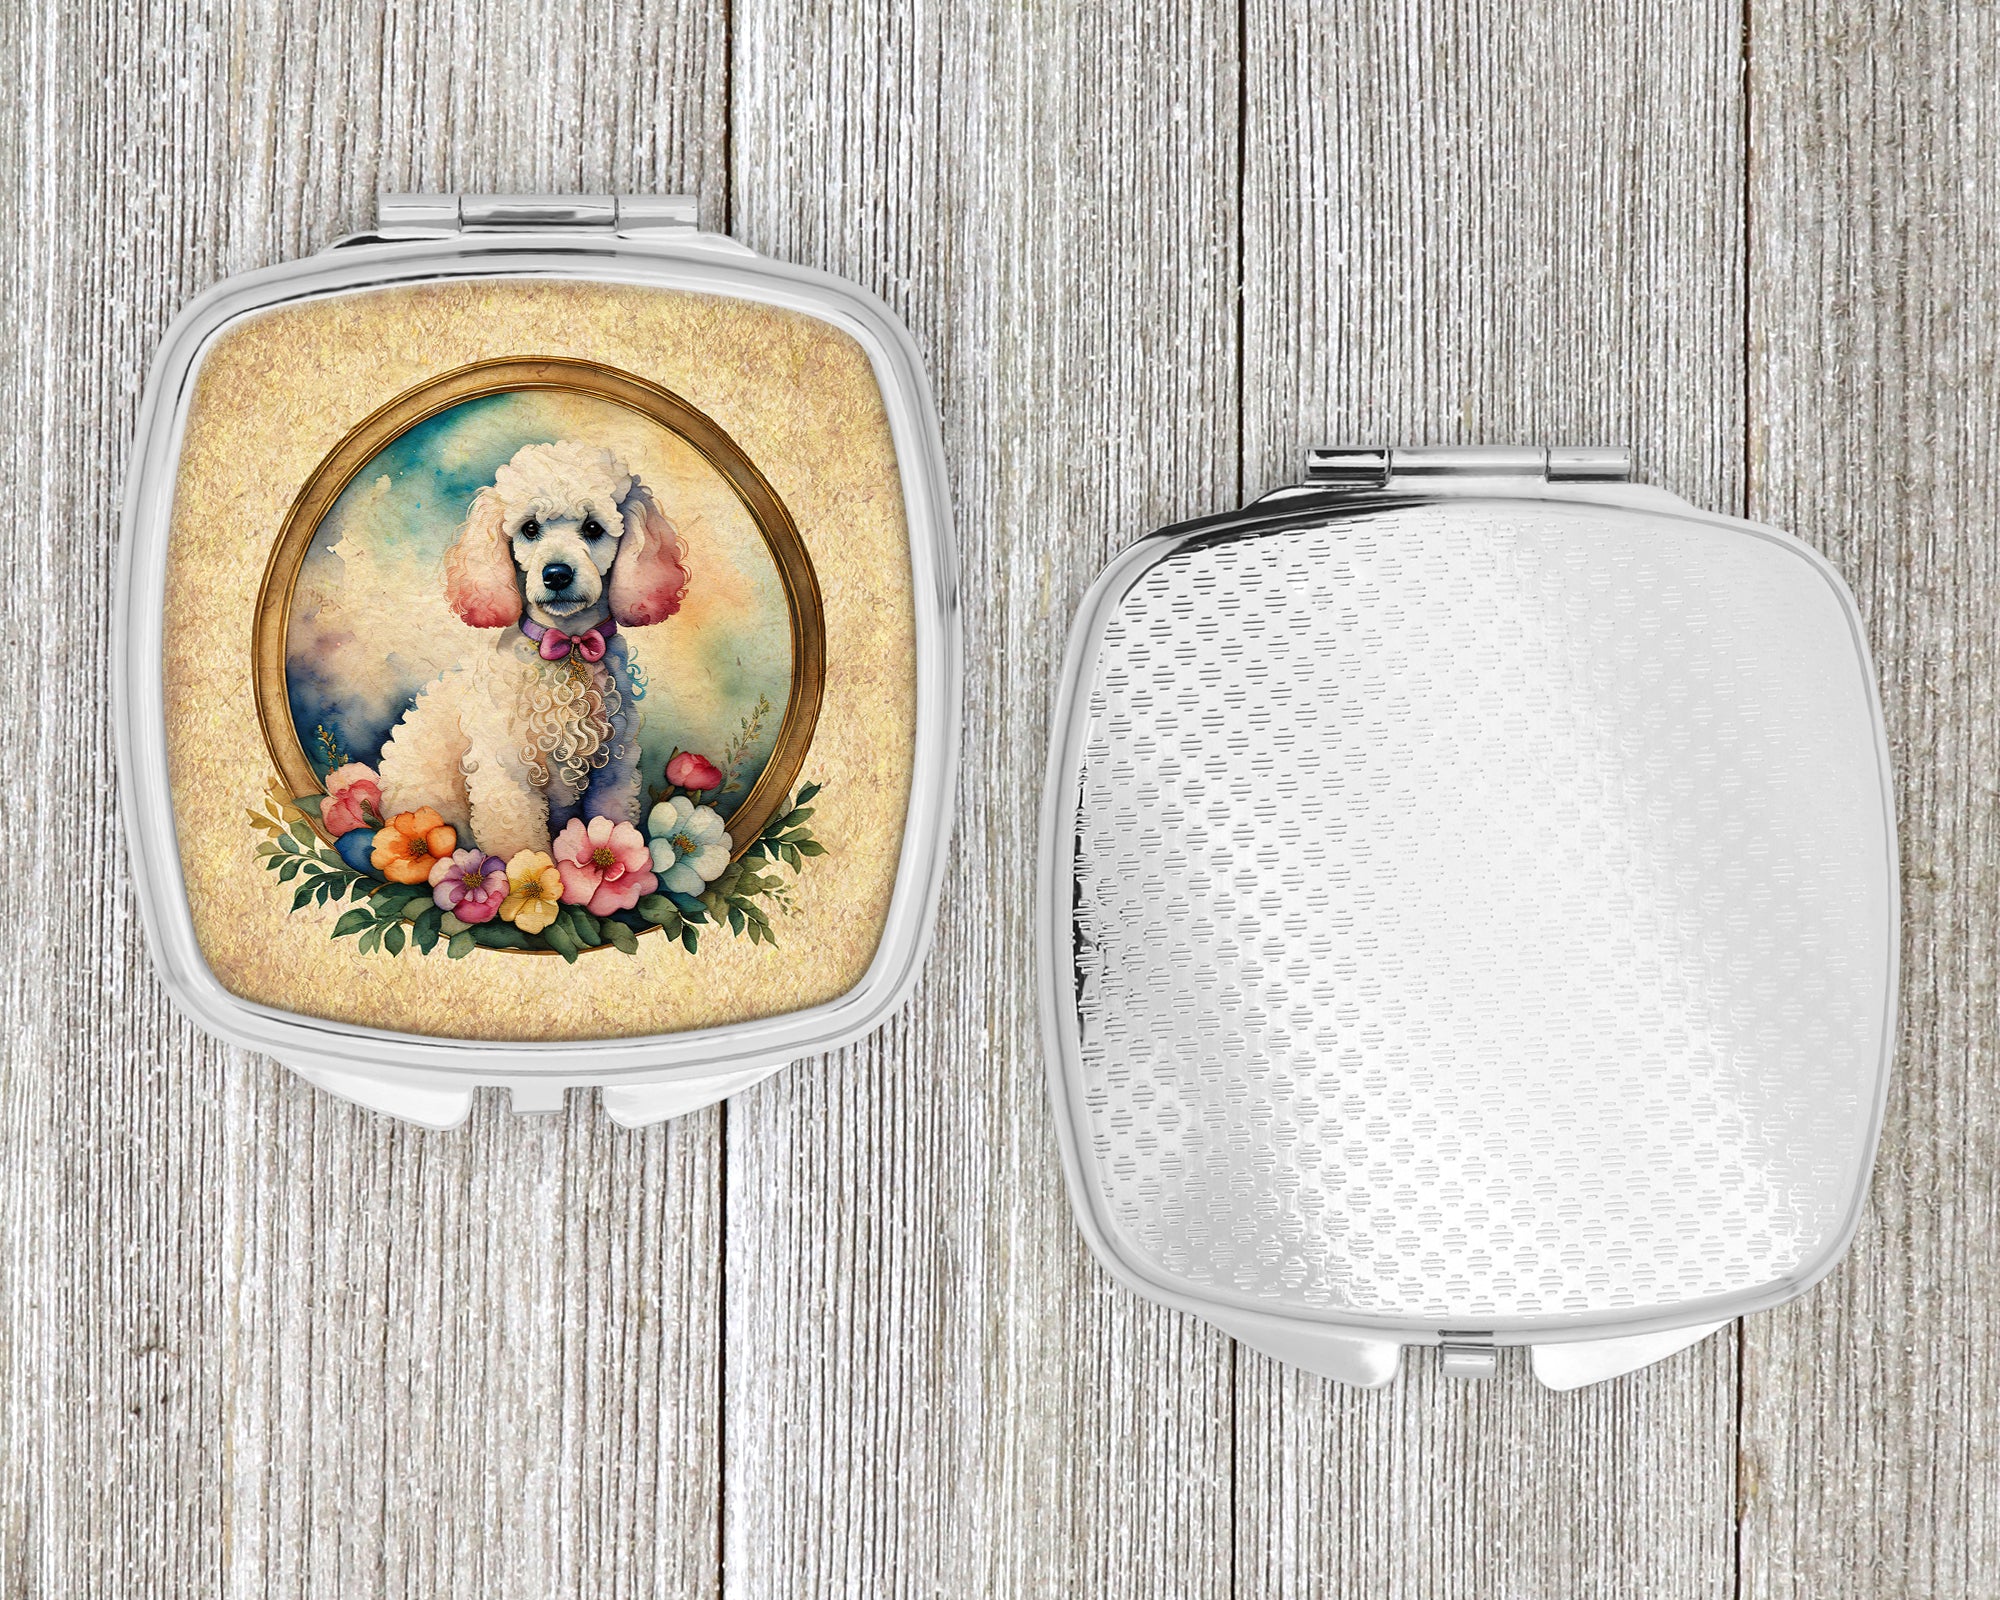 White Poodle and Flowers Compact Mirror